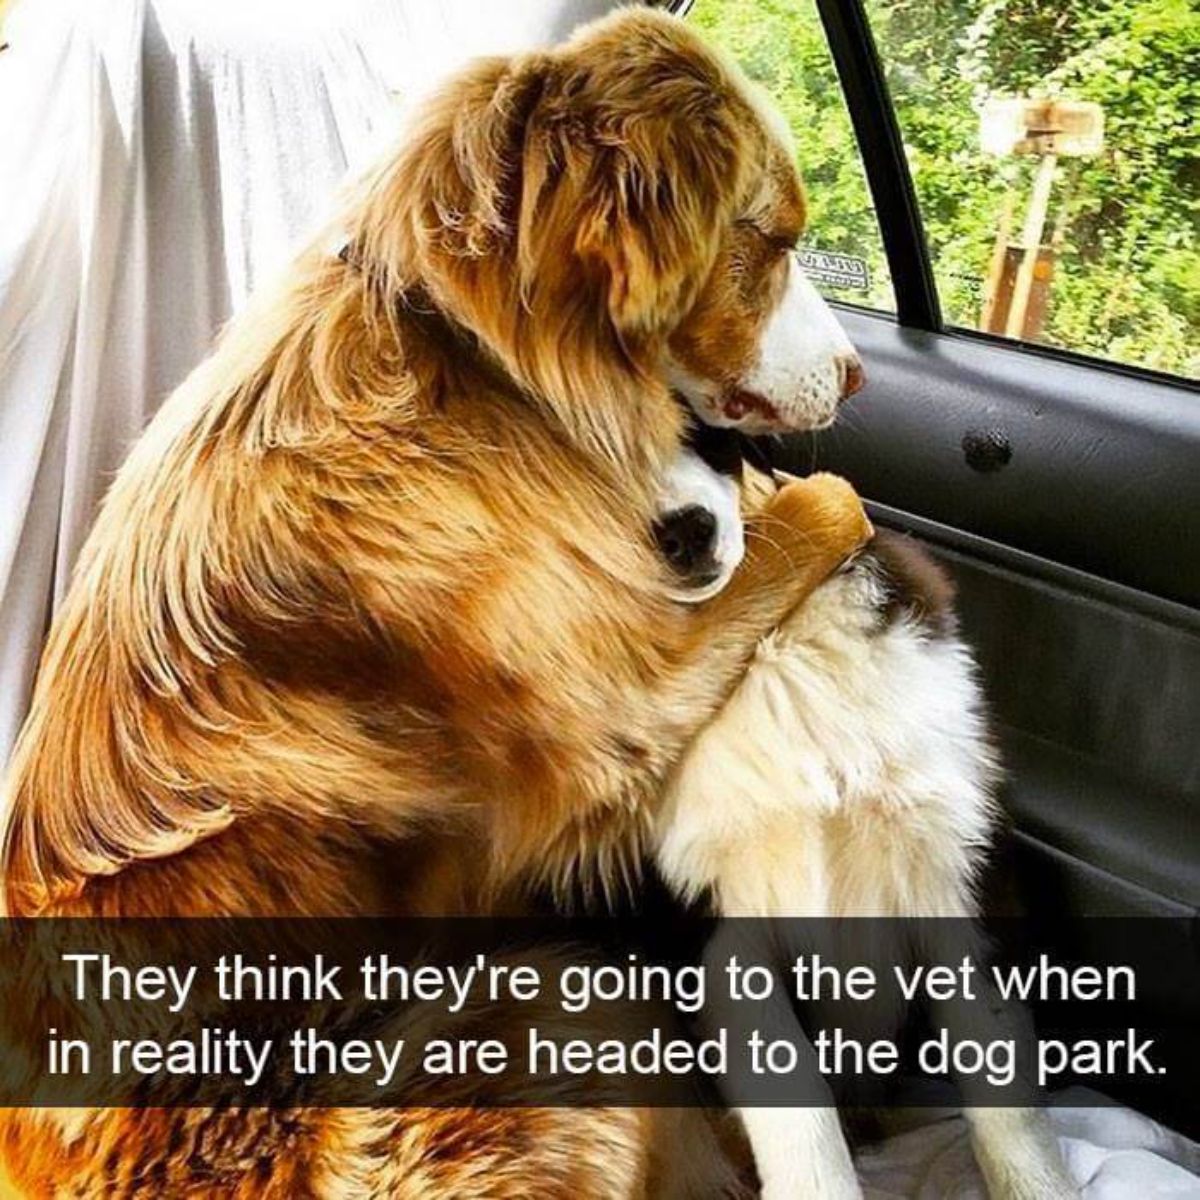 fluffy brown and white dog hugging a fluffy black and white dog in the back seat of a vehicle with a caption saying they think they're going to the vet when in reality they're headed to the dog park